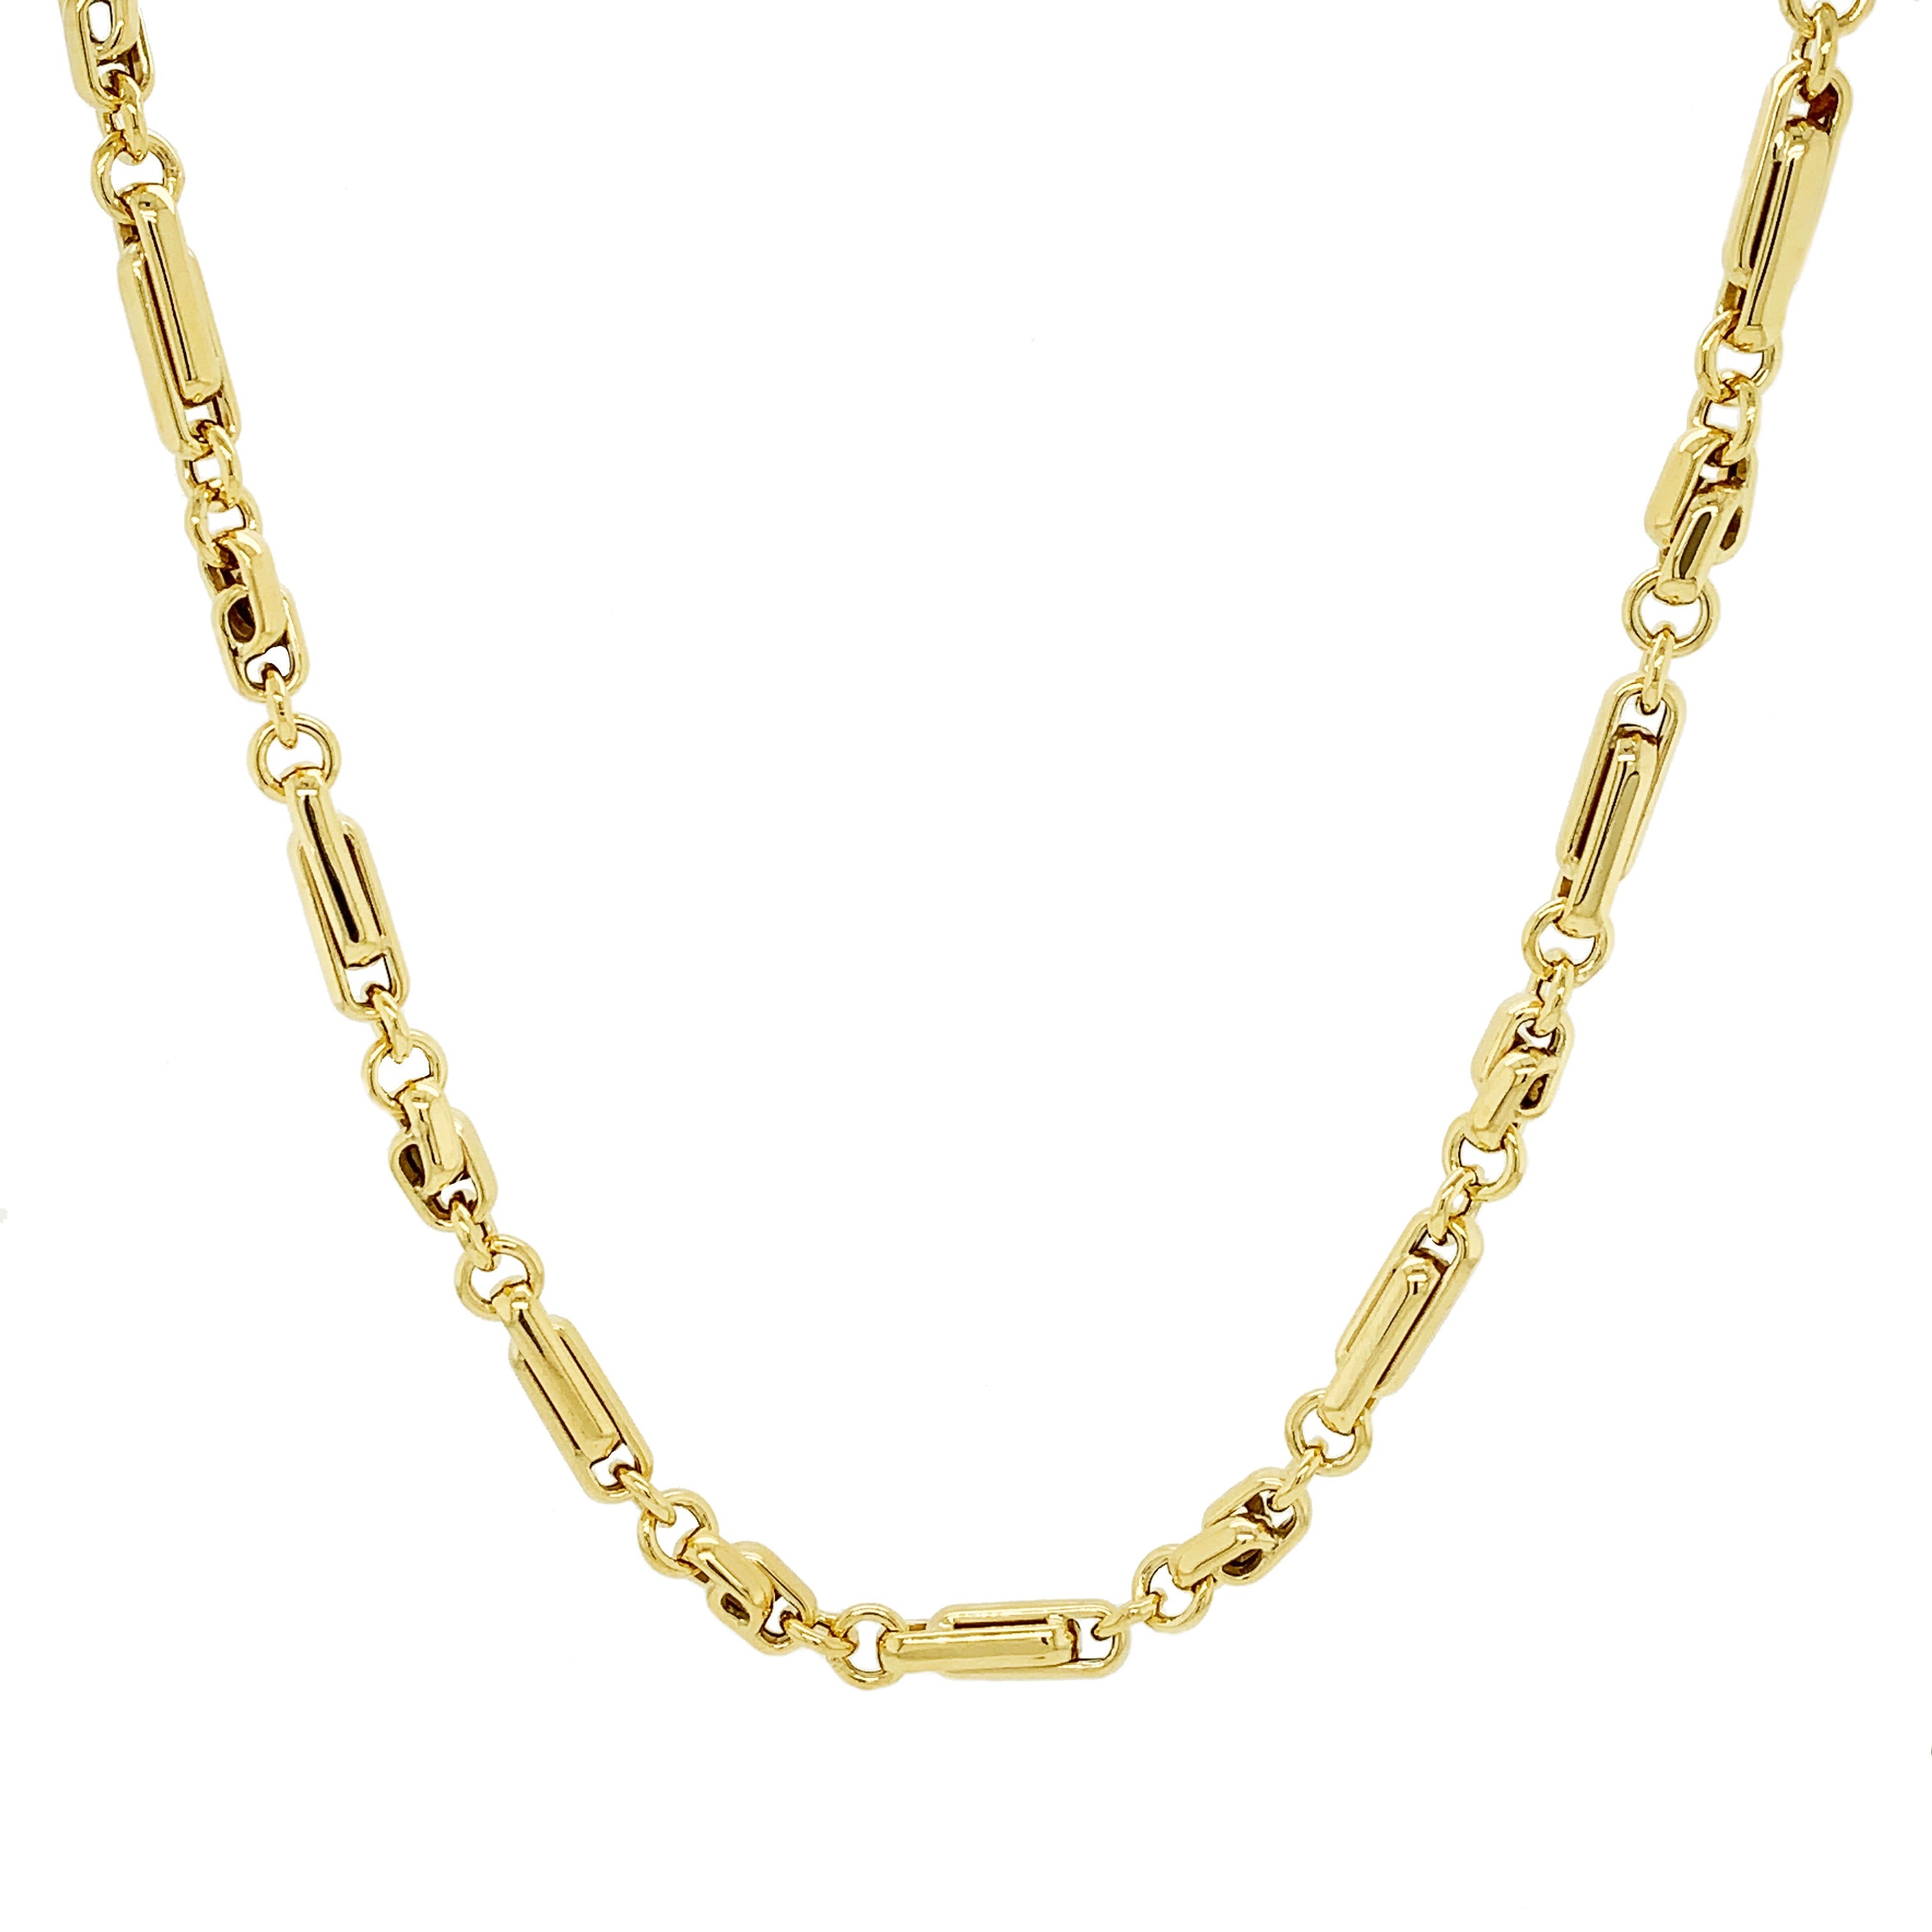 YELLOW GOLD LONG AND SHORT KNOT NECKLACE